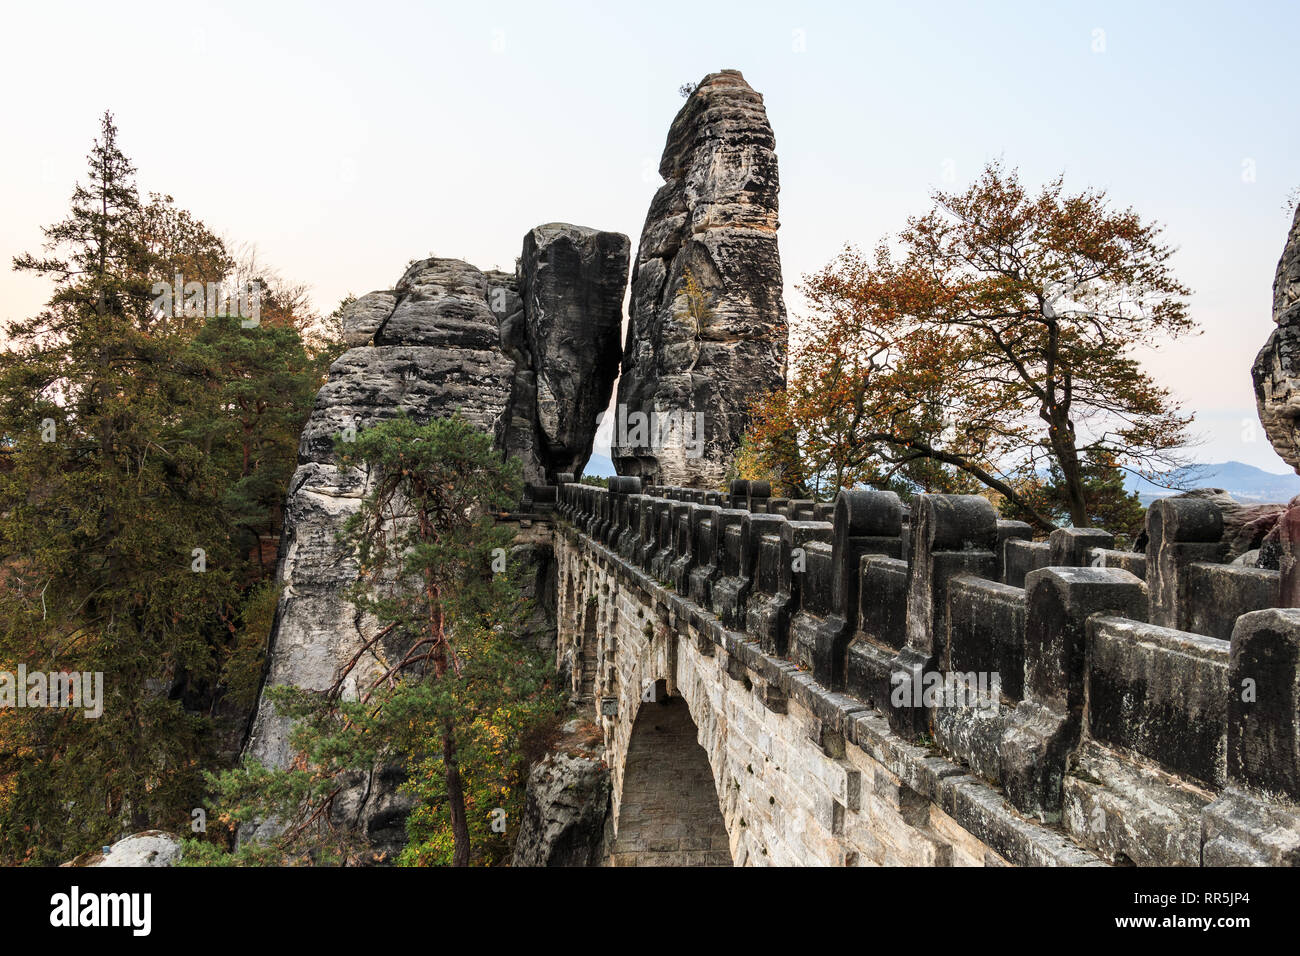 Bastei bridge national park Saxon Switzerland in Elbe Sandstone Mountains in side view. Rock formation with the rocky gate in autumn with trees Stock Photo